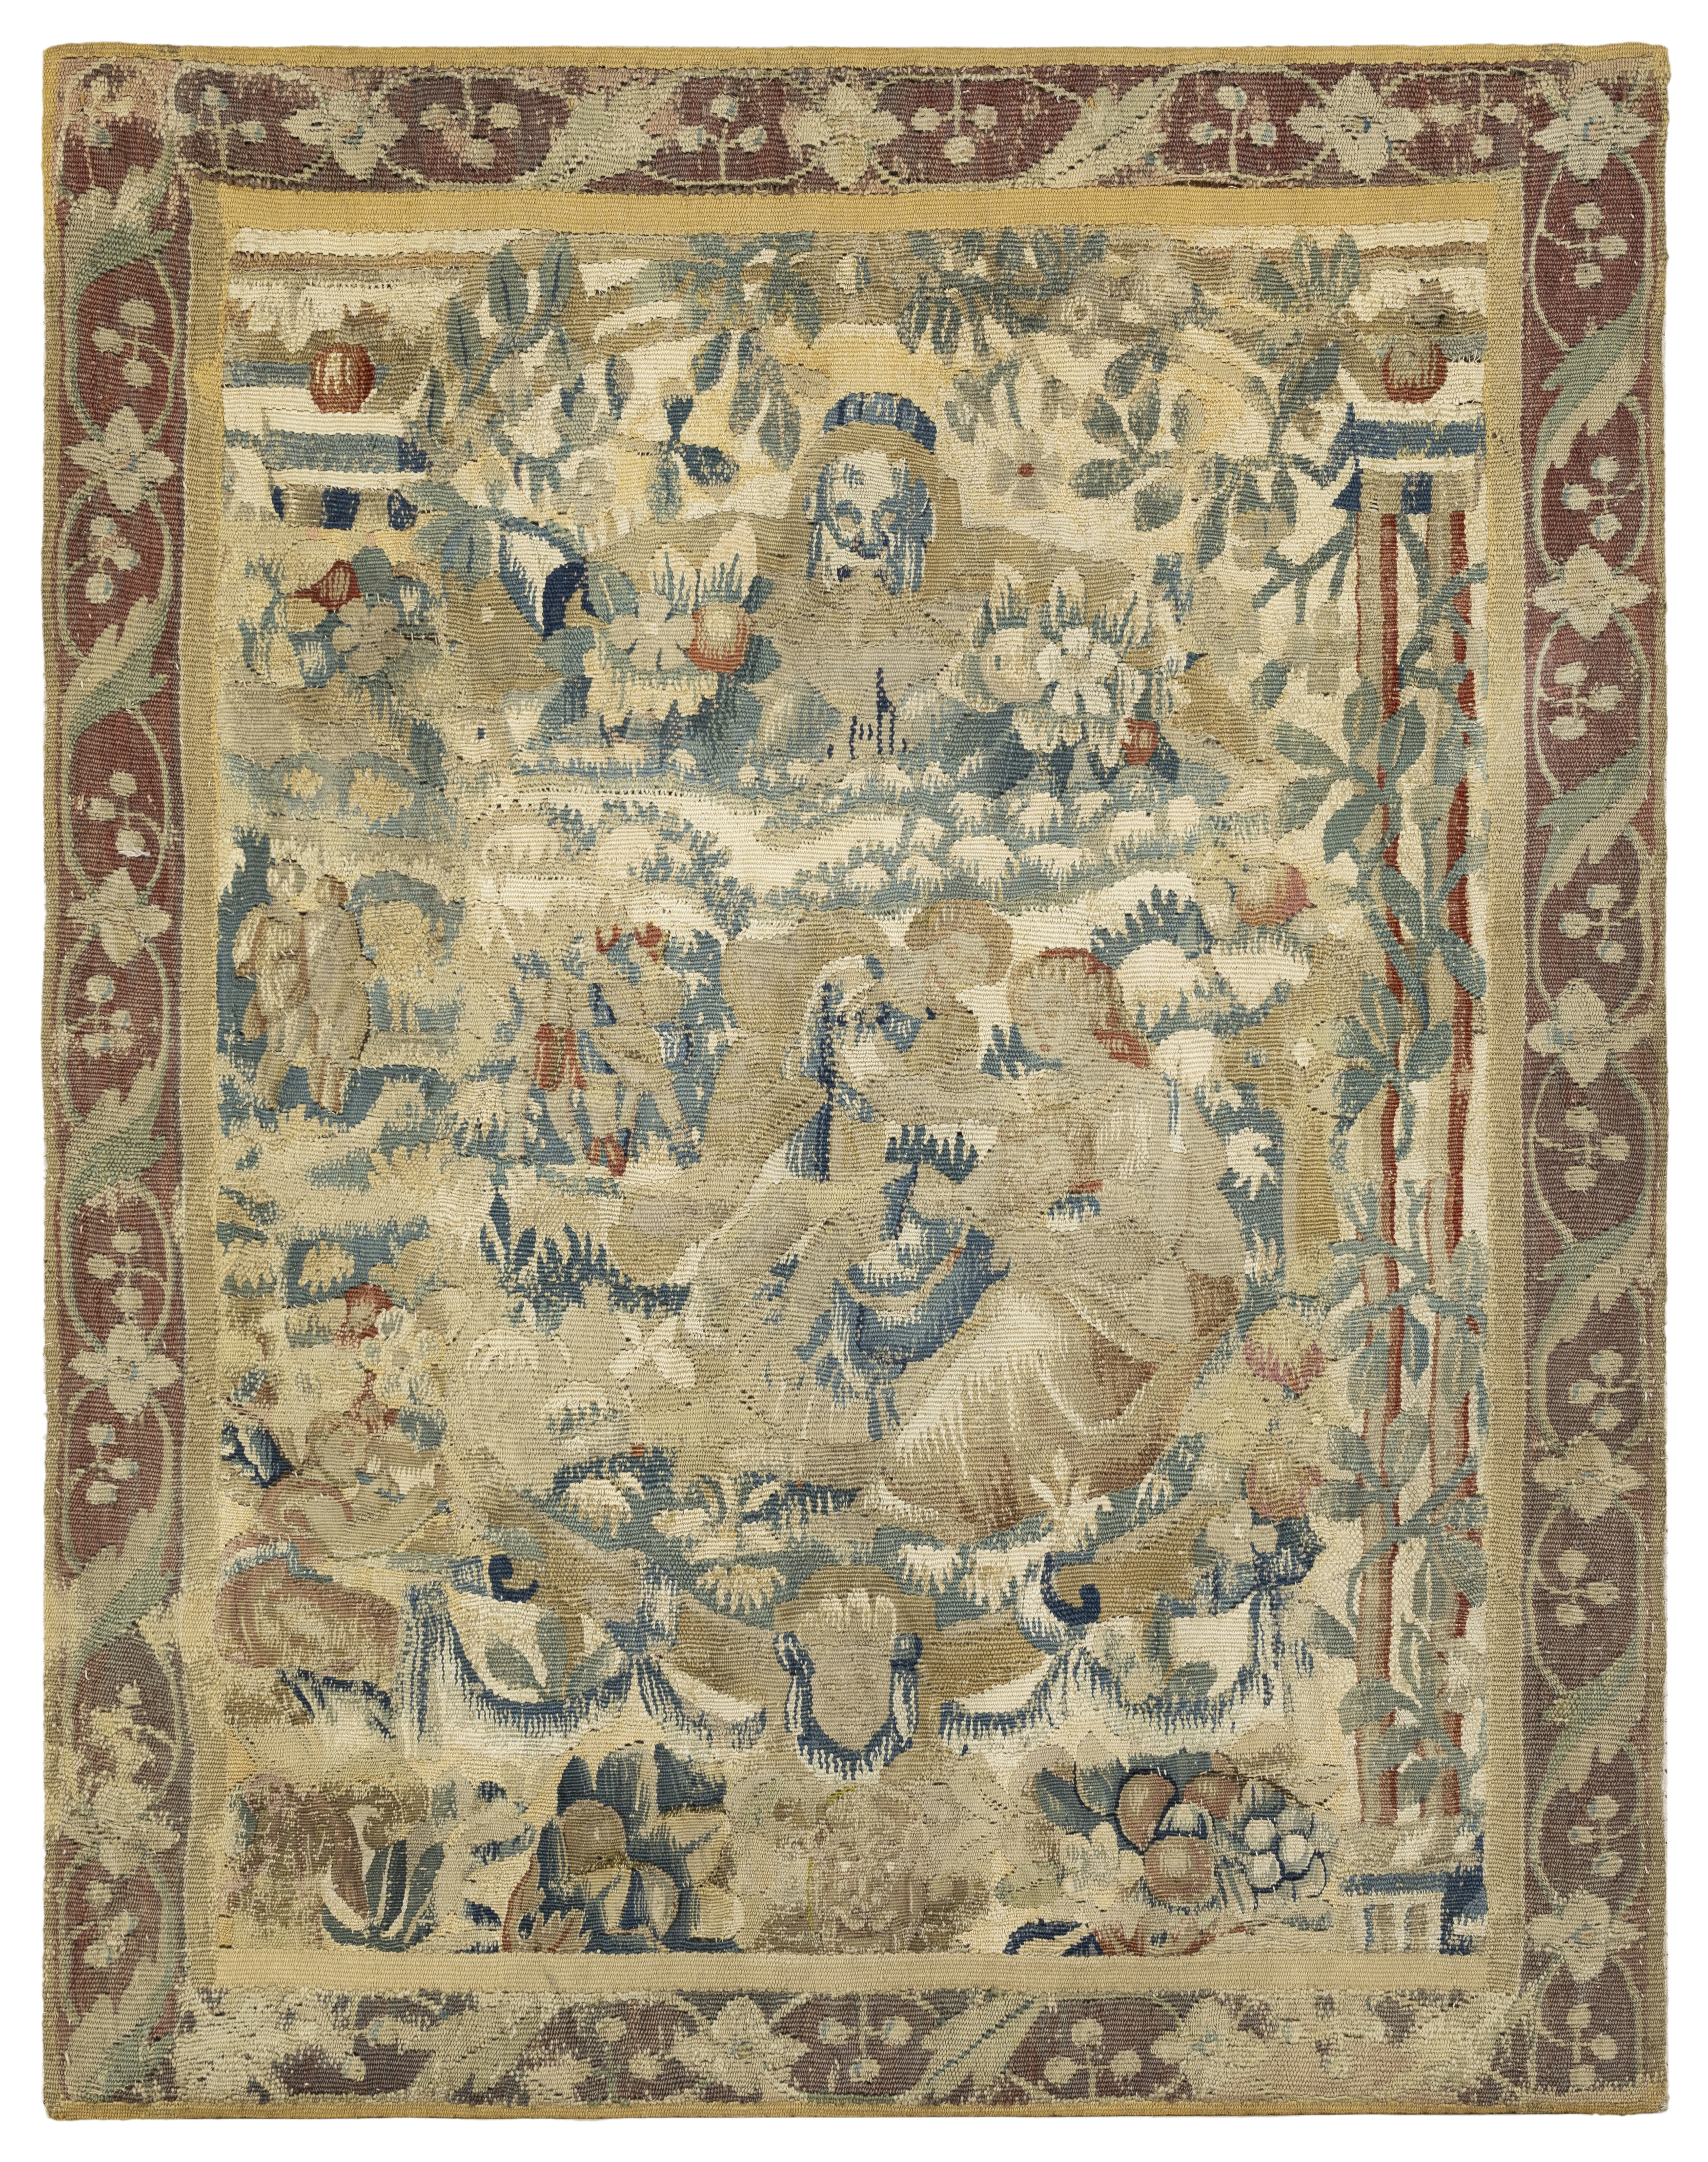 A Flemish biblical tapestry fragment, 17th century, Woven in wools and silks, depicting Samson an...